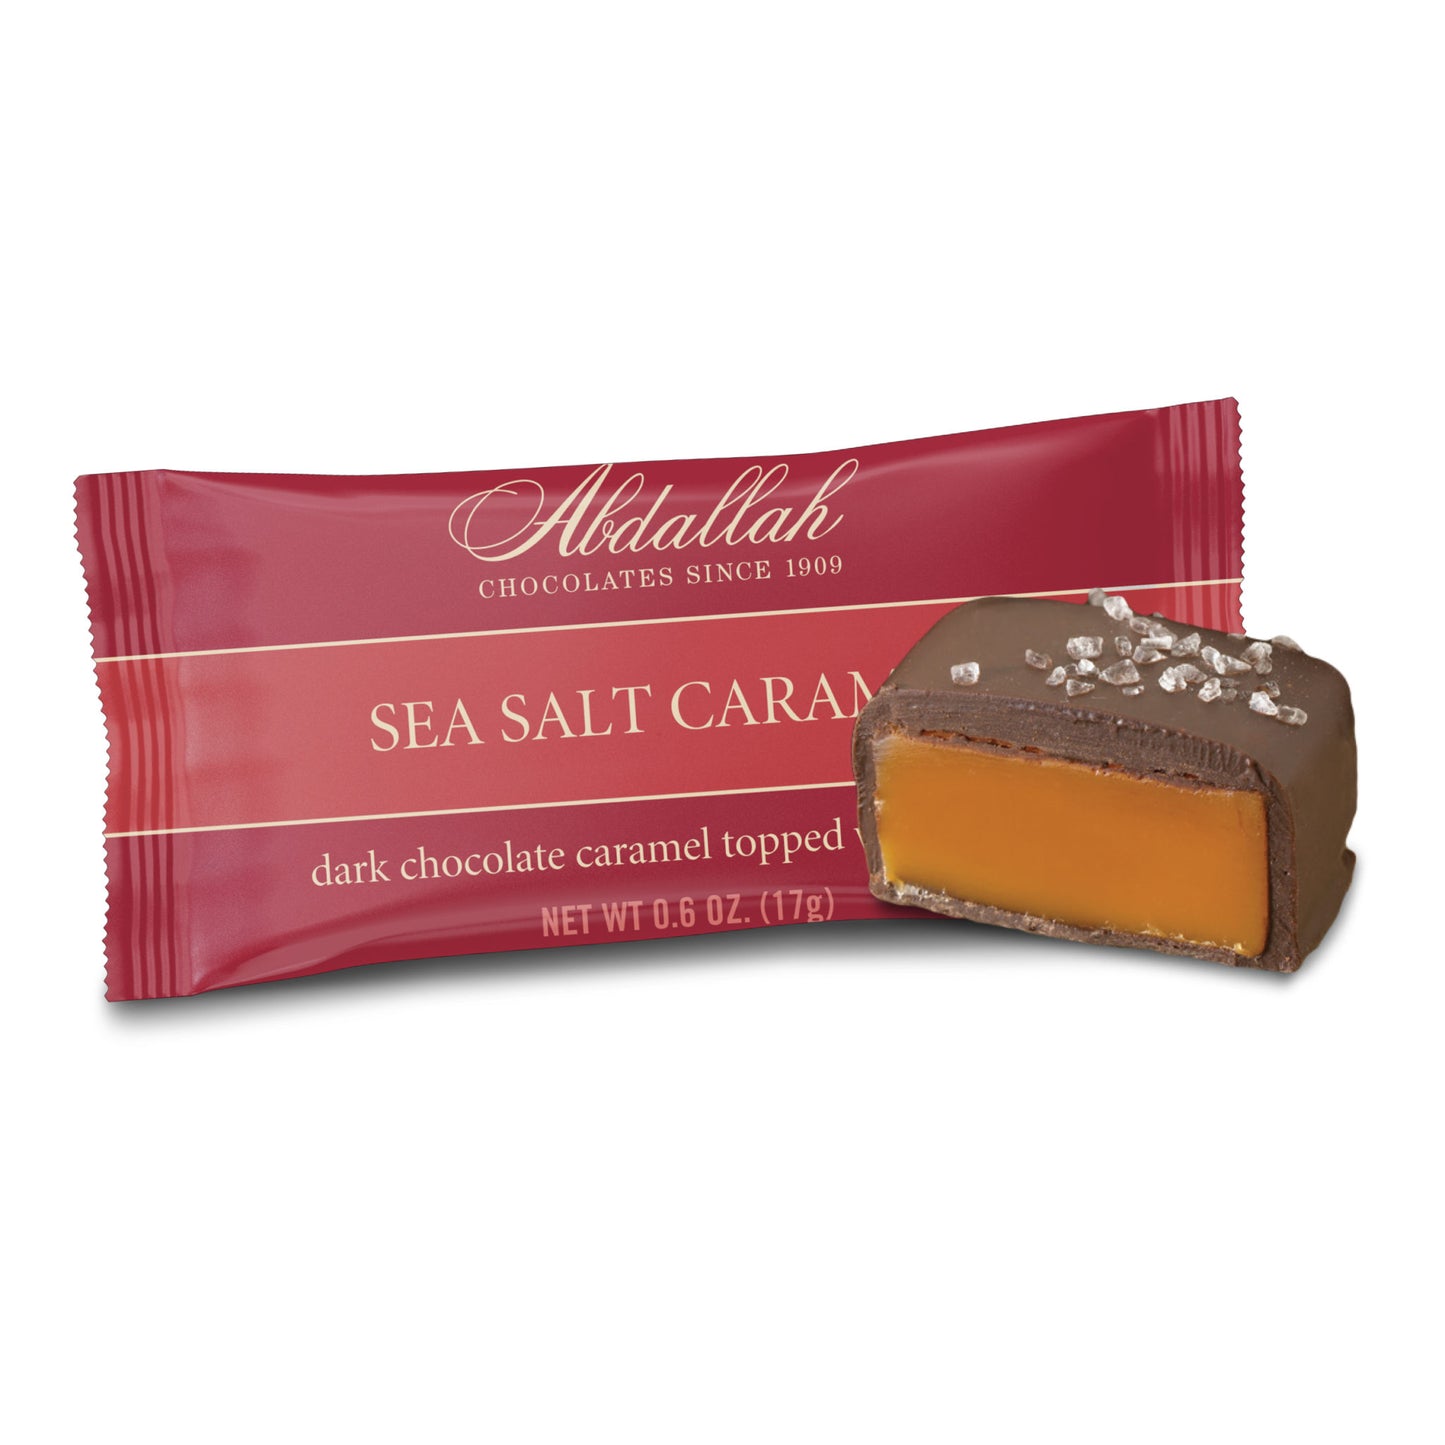 sea salt caramel candy bar wrapper with piece of candy on a white background